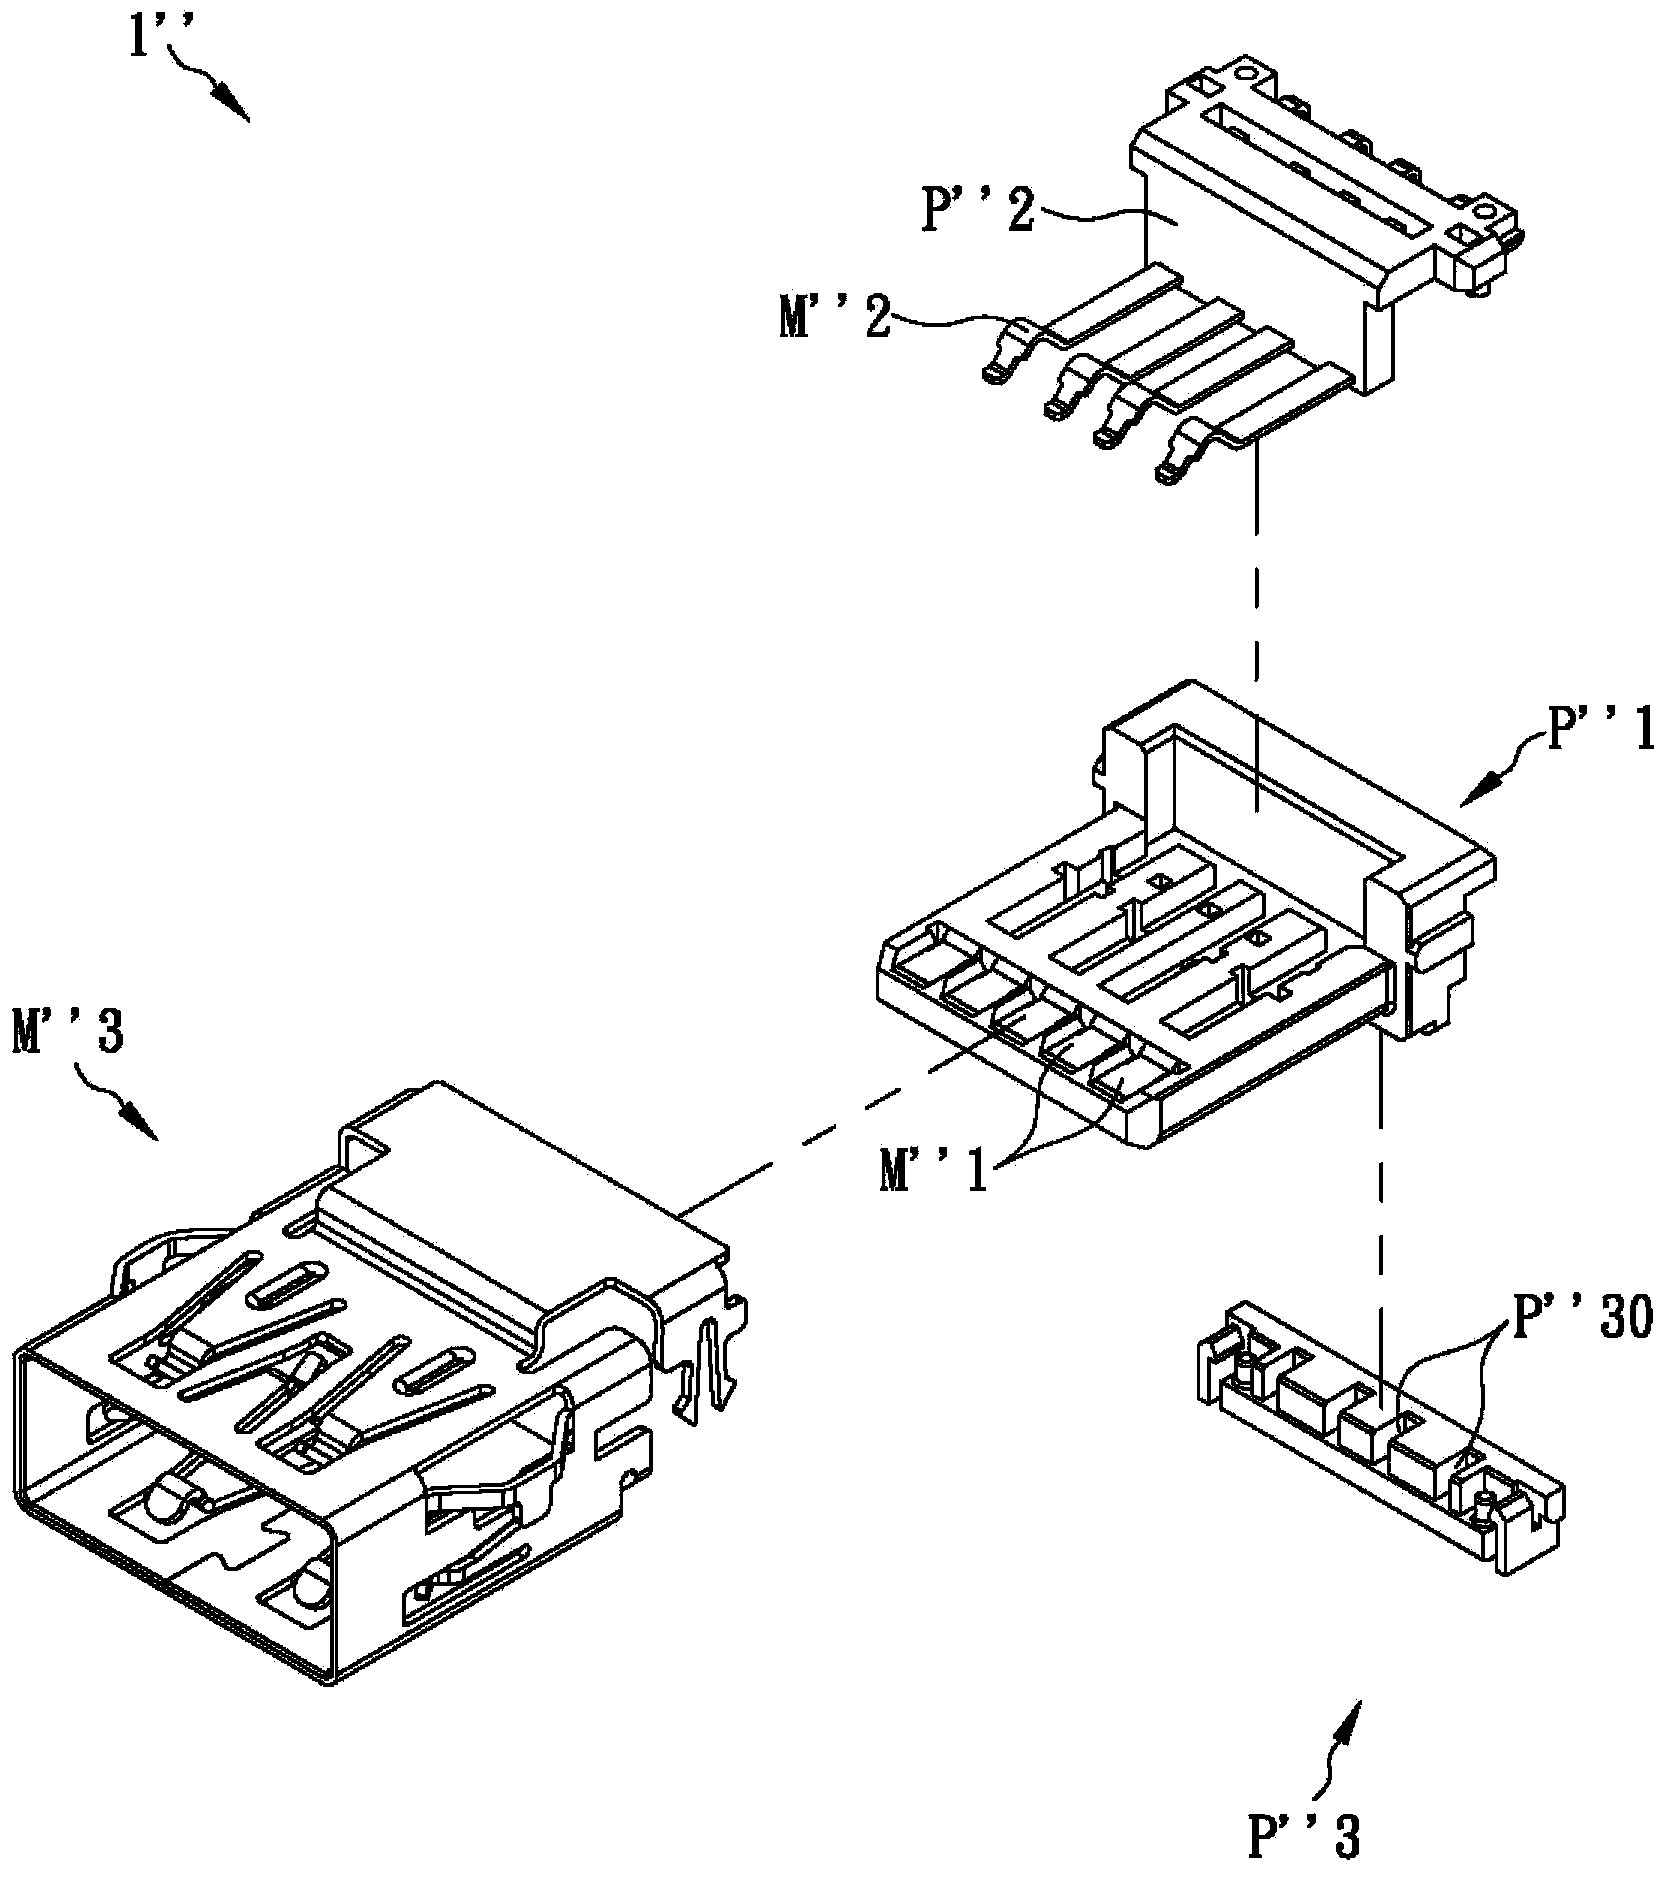 Method for locating connecting terminal by using repeat buried injection technology